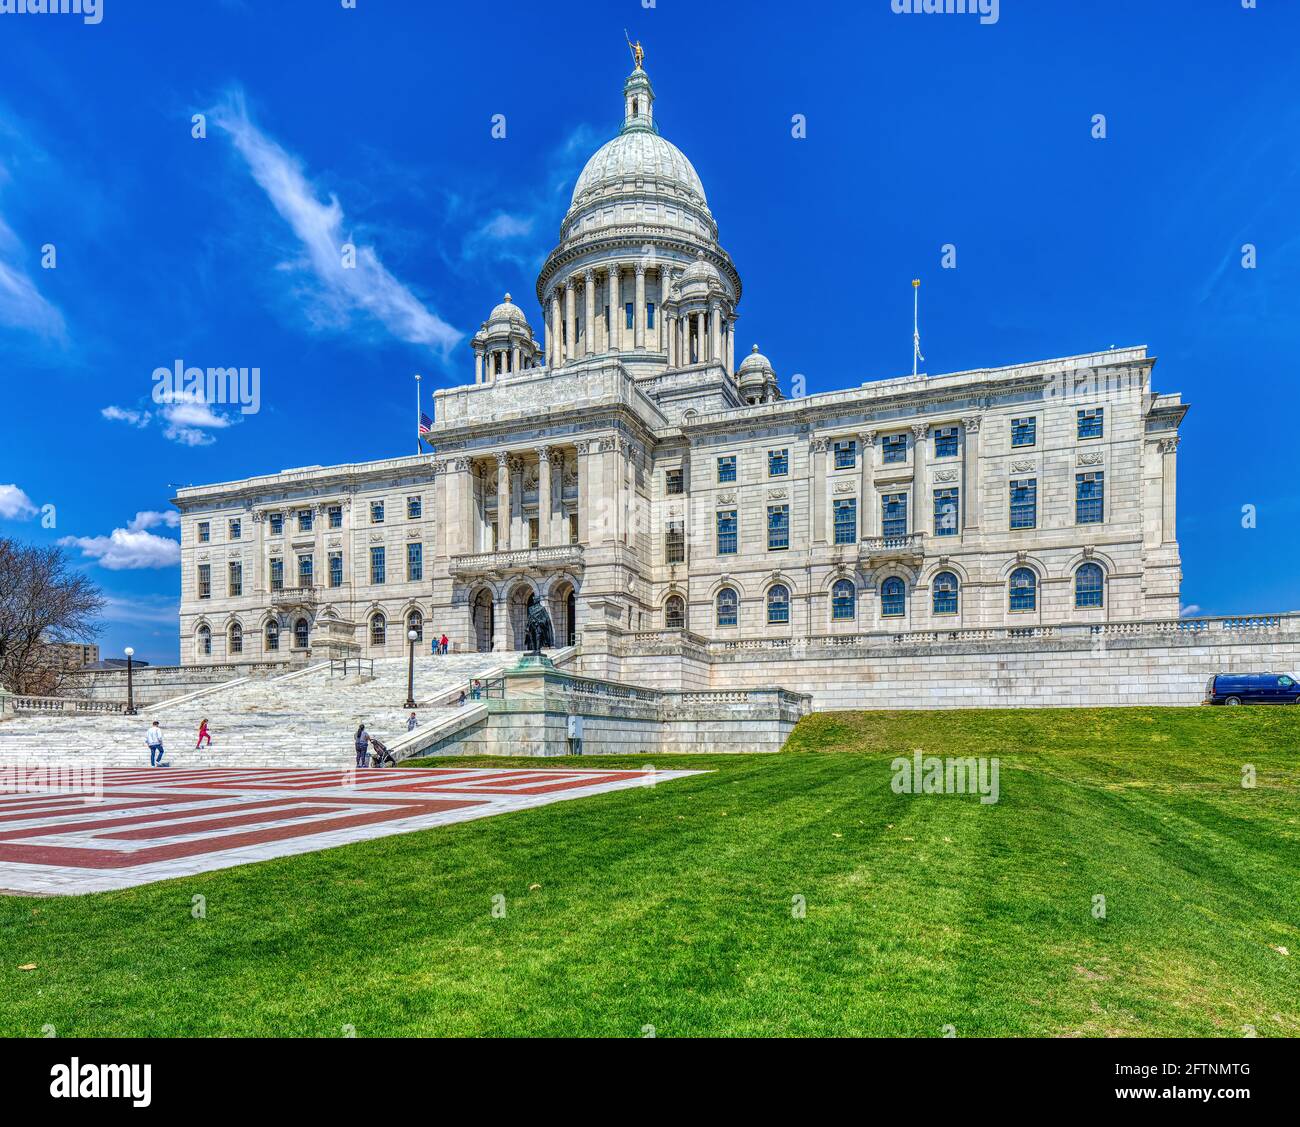 List 104+ Images what is the state capital of rhode island Latest